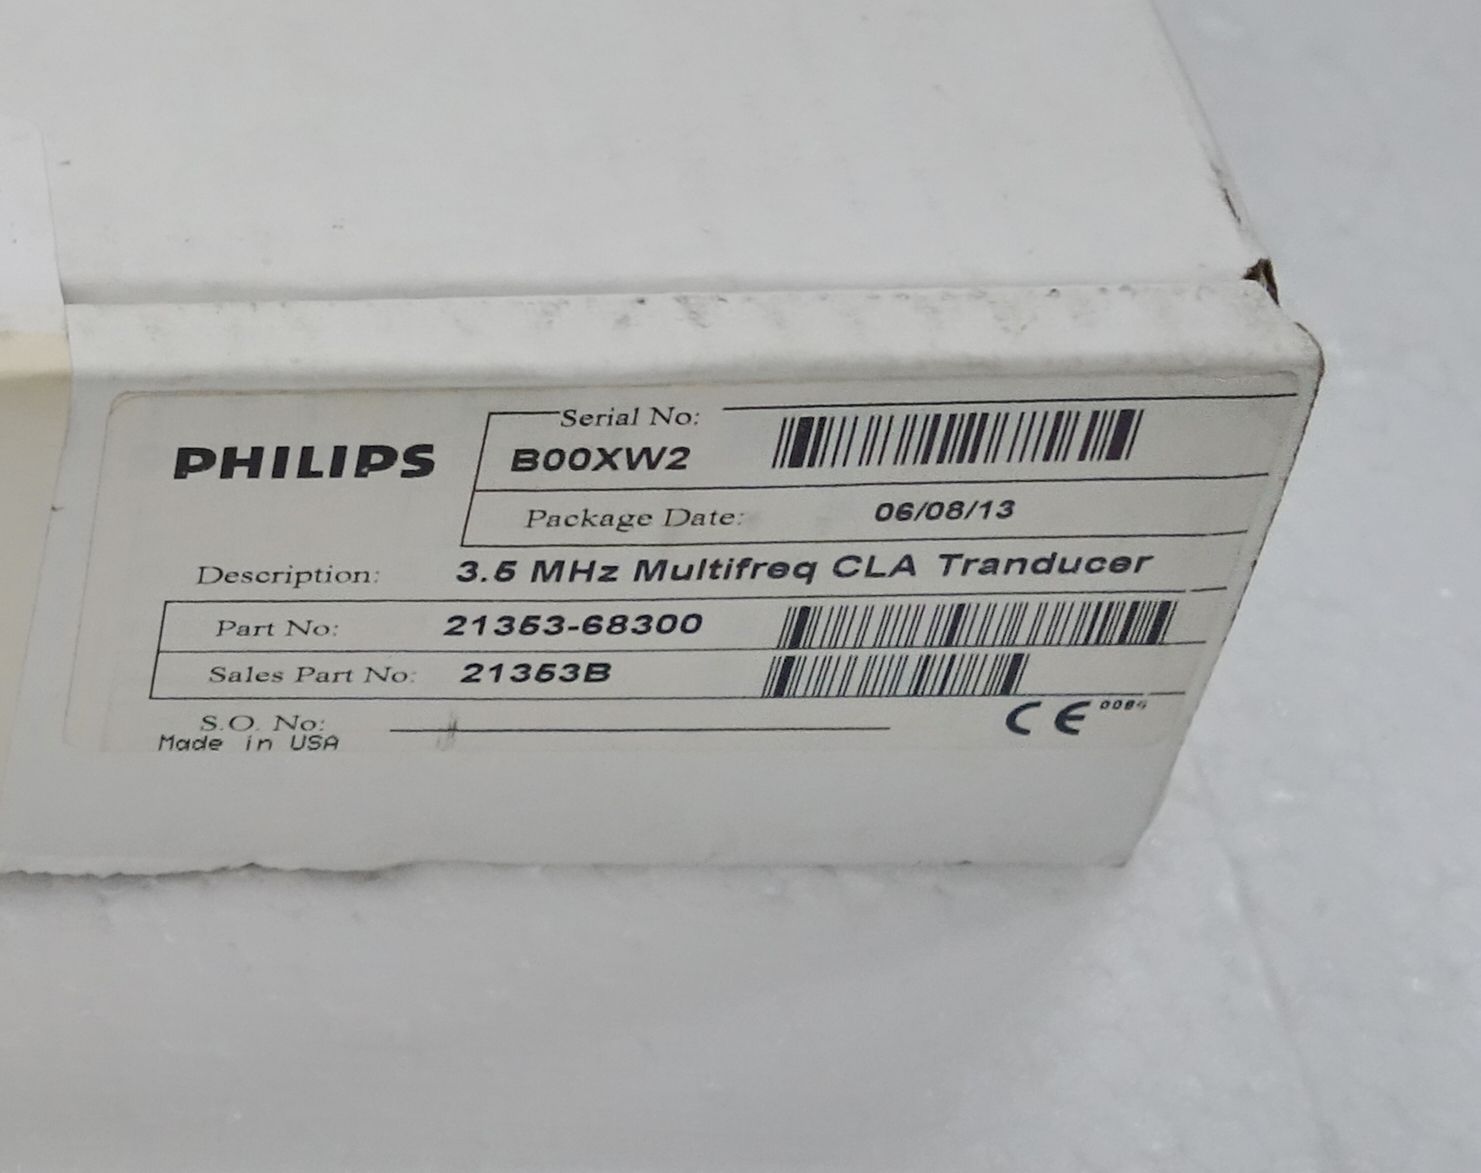 a box with a label on it sitting on a table